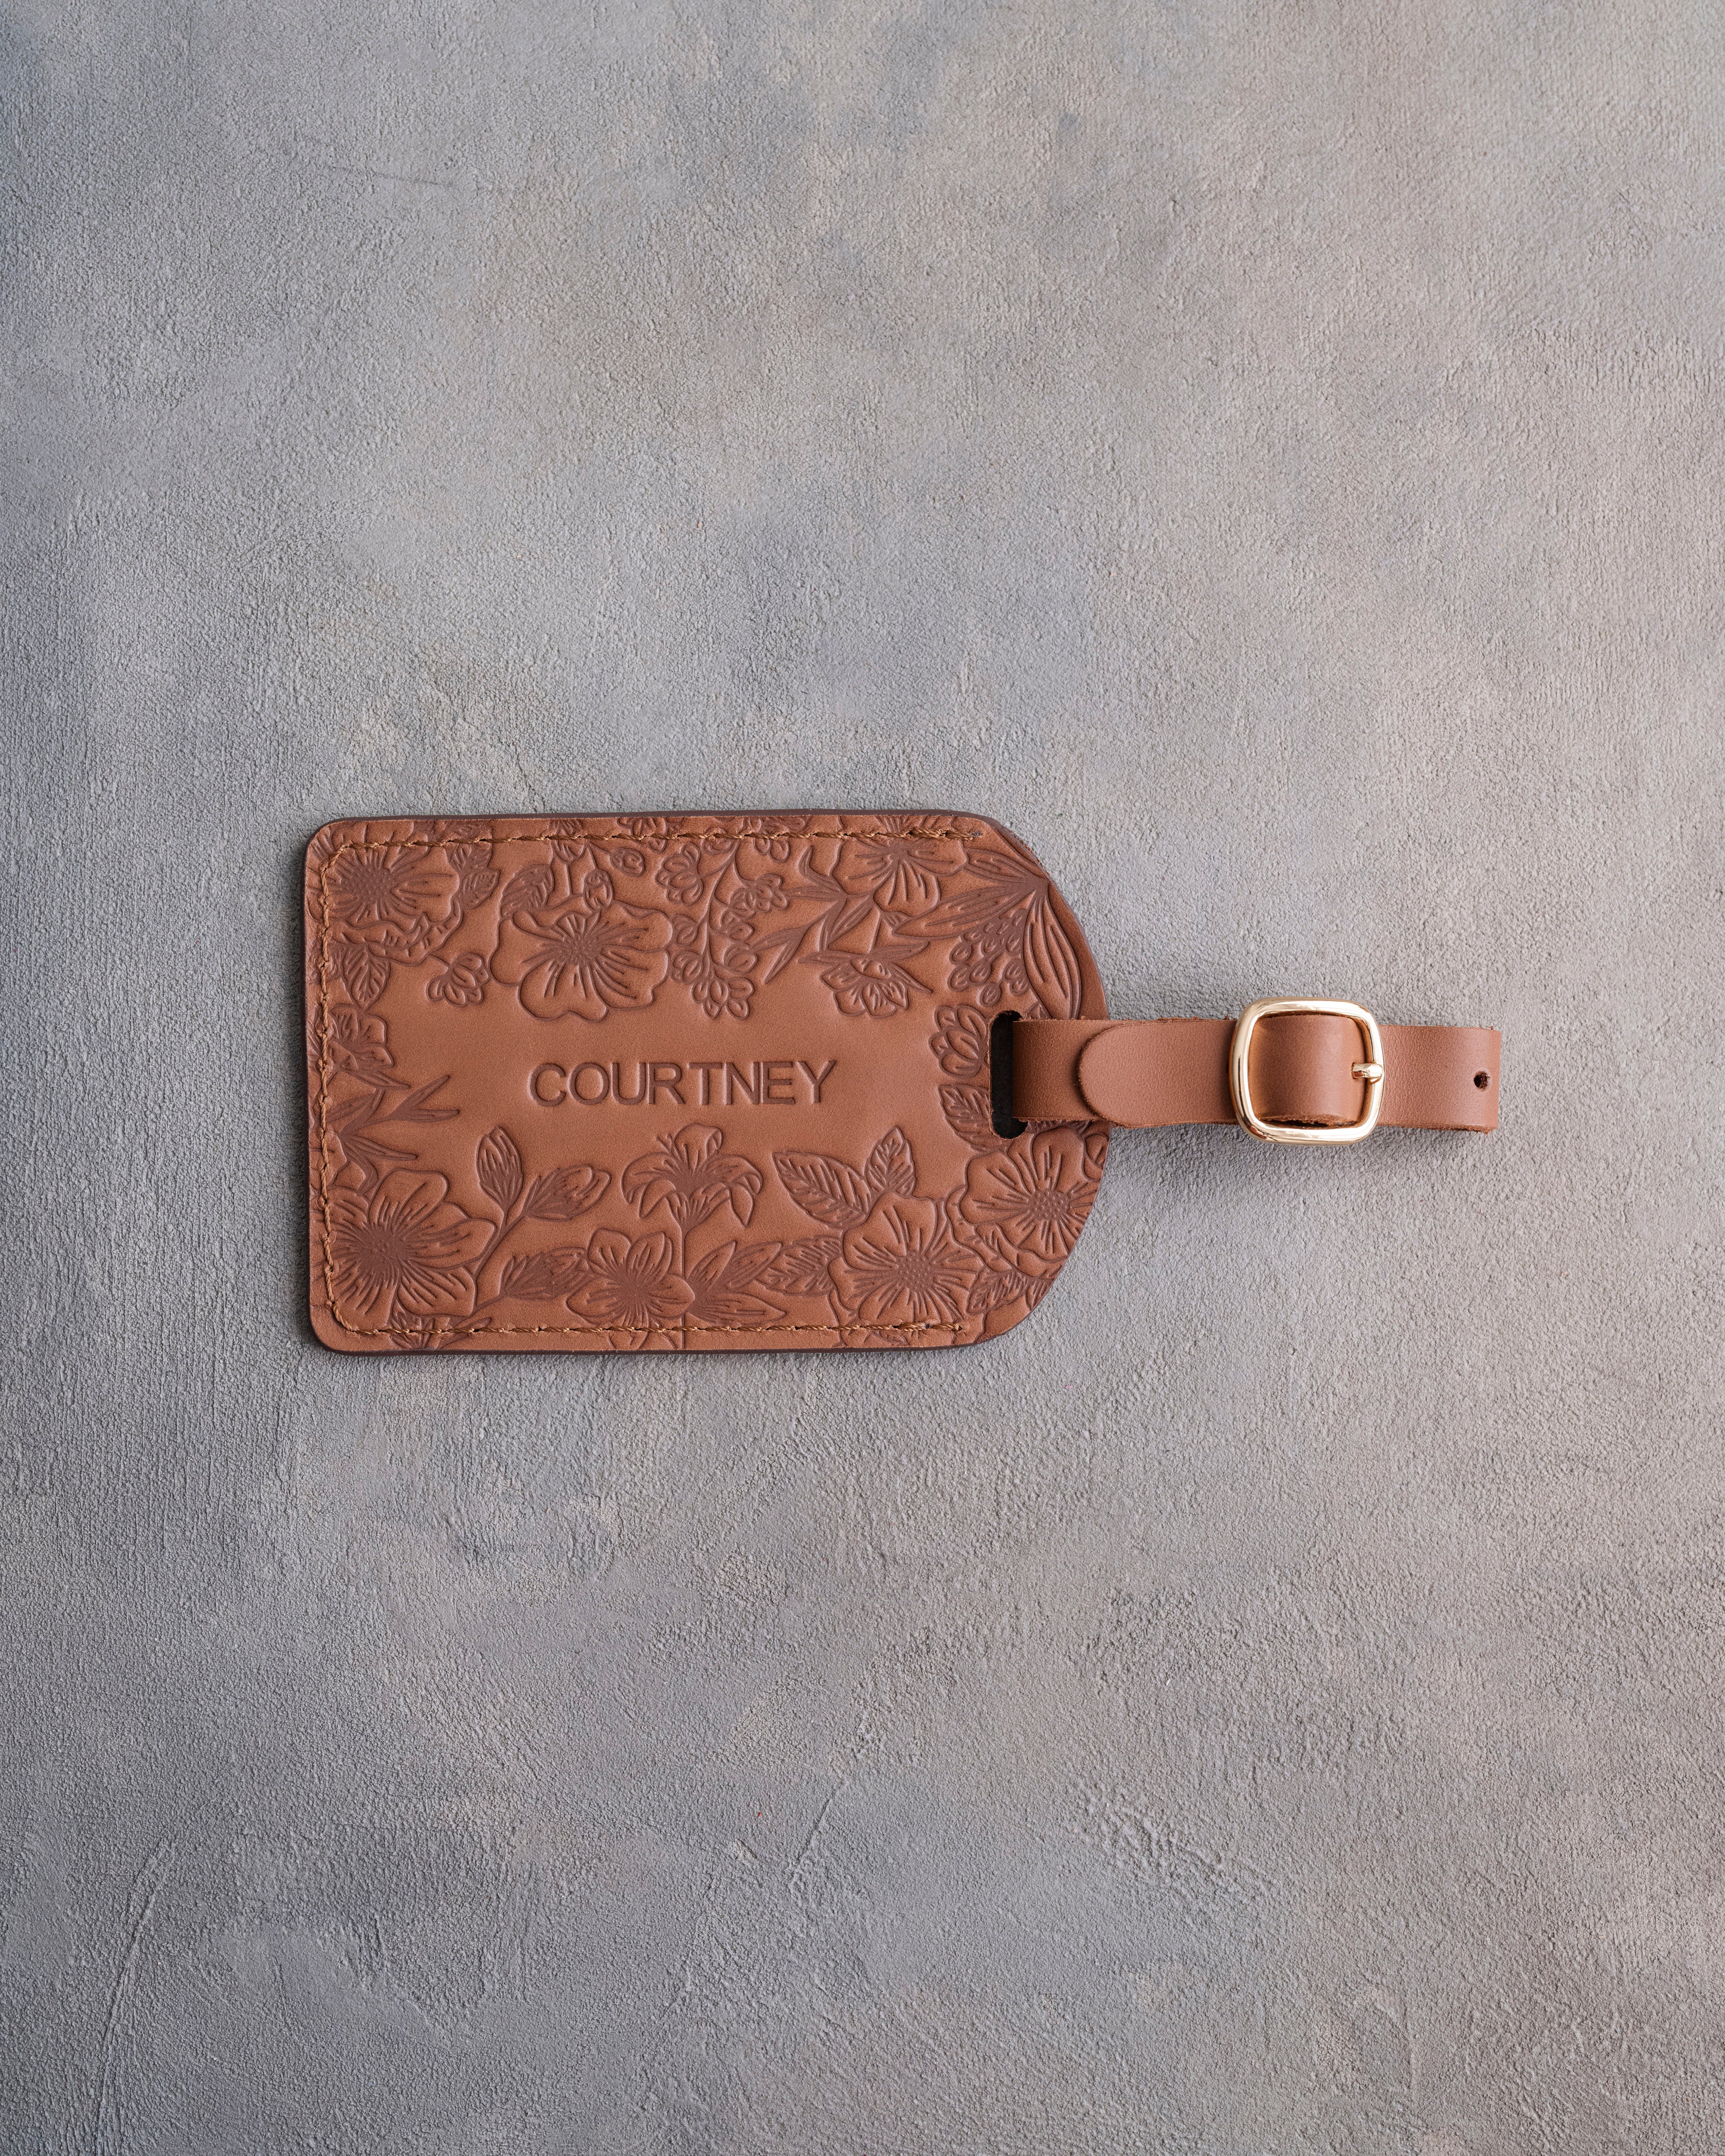 Floral Name Luggage Tag in Caramel Leather